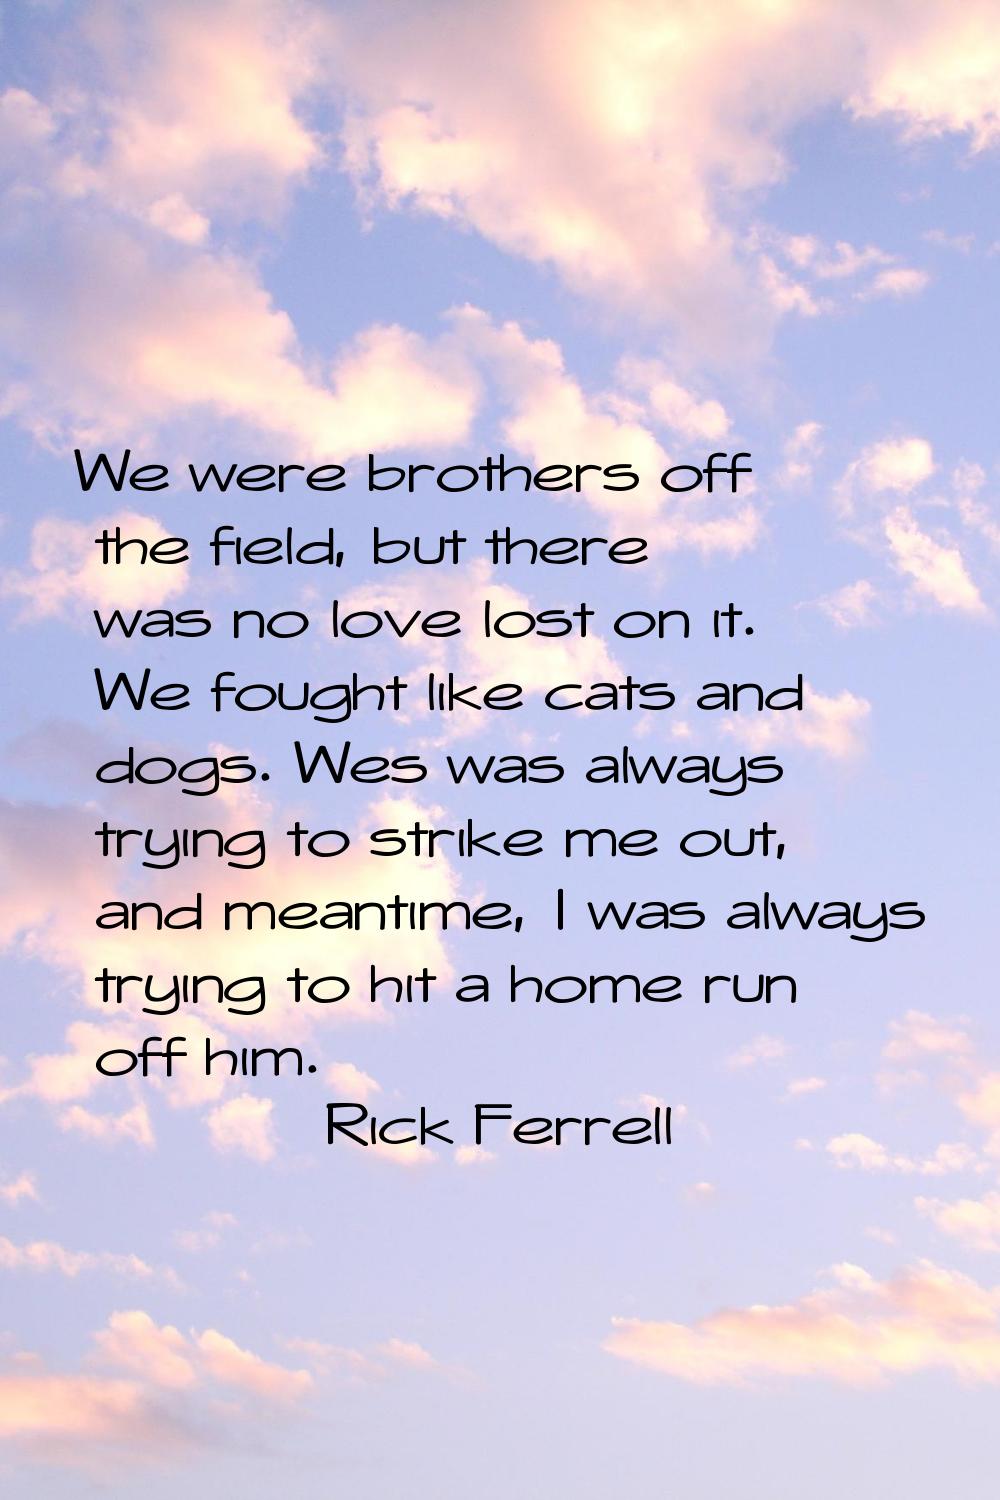 We were brothers off the field, but there was no love lost on it. We fought like cats and dogs. Wes